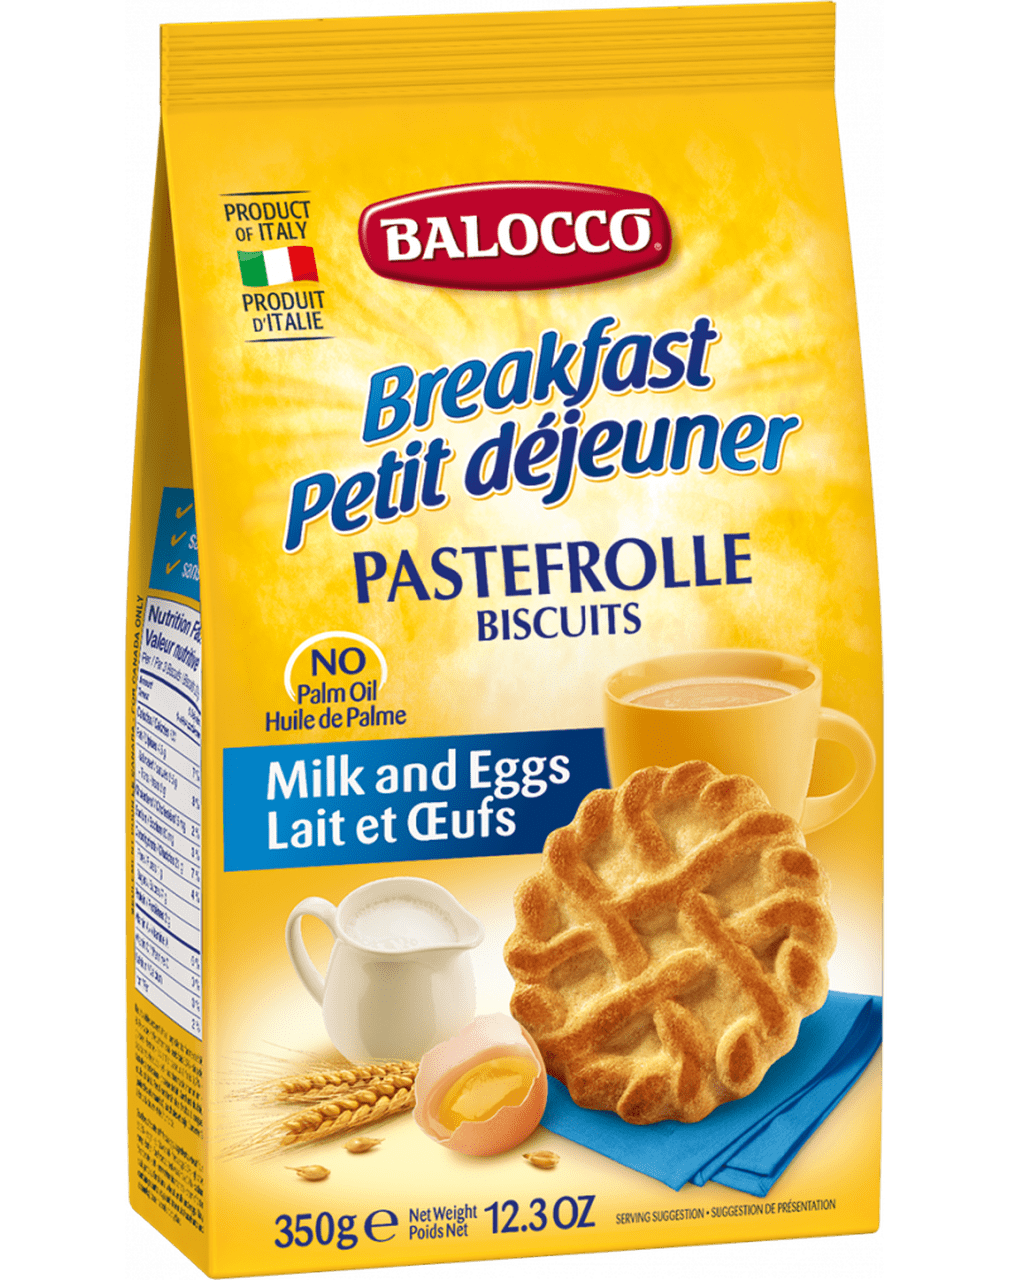 Pastefrolle Biscotti Frollini, by Balocco 12.3 oz - [Premium Italian Food at Home ]